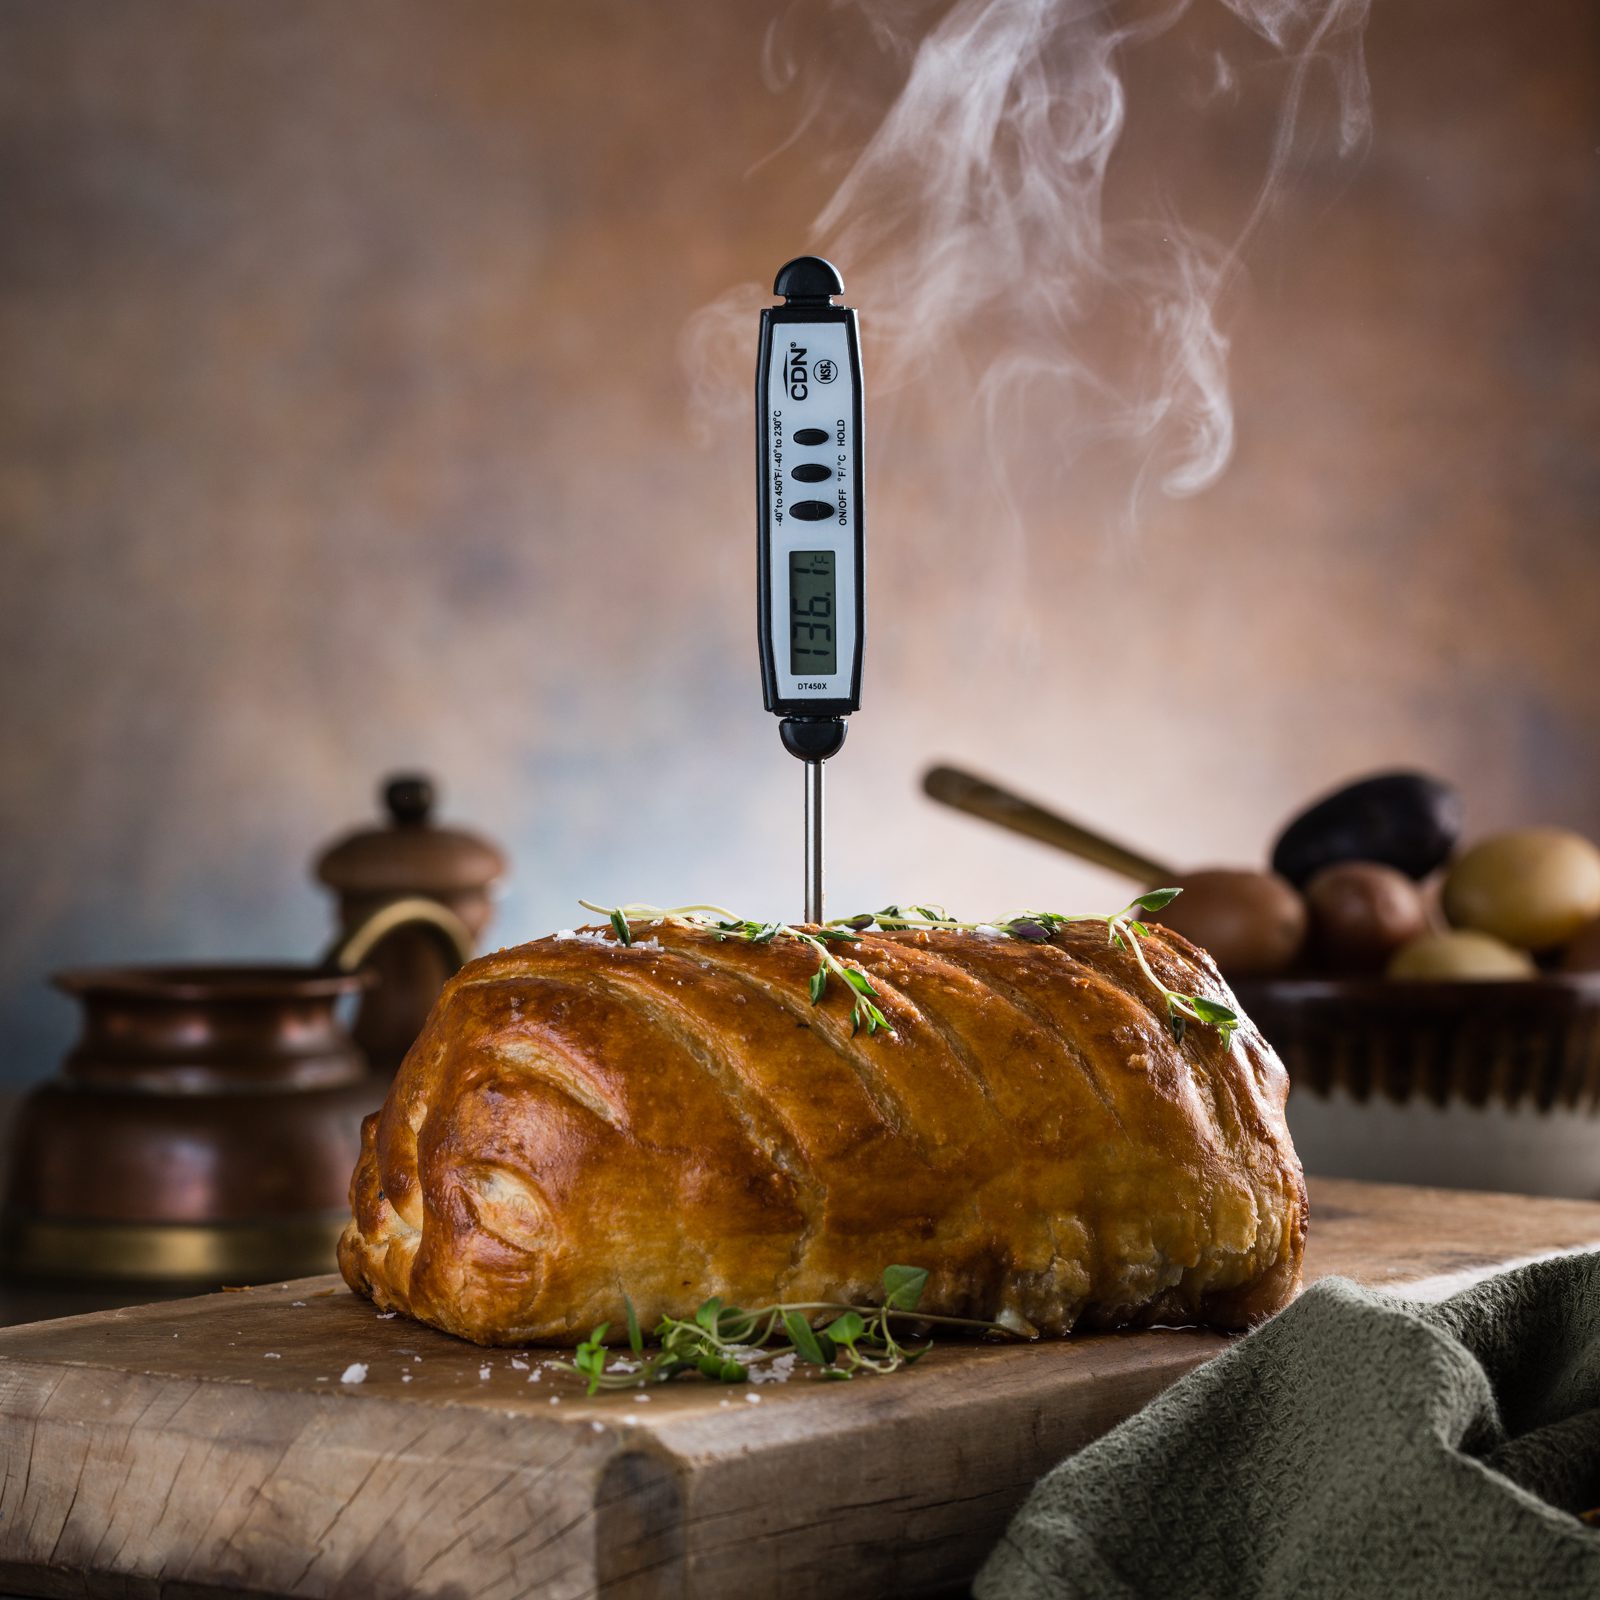 https://www.myfoodbag.co.nz/wp-content/uploads/2021/06/Beef-Wellington-thermometer-2.jpg